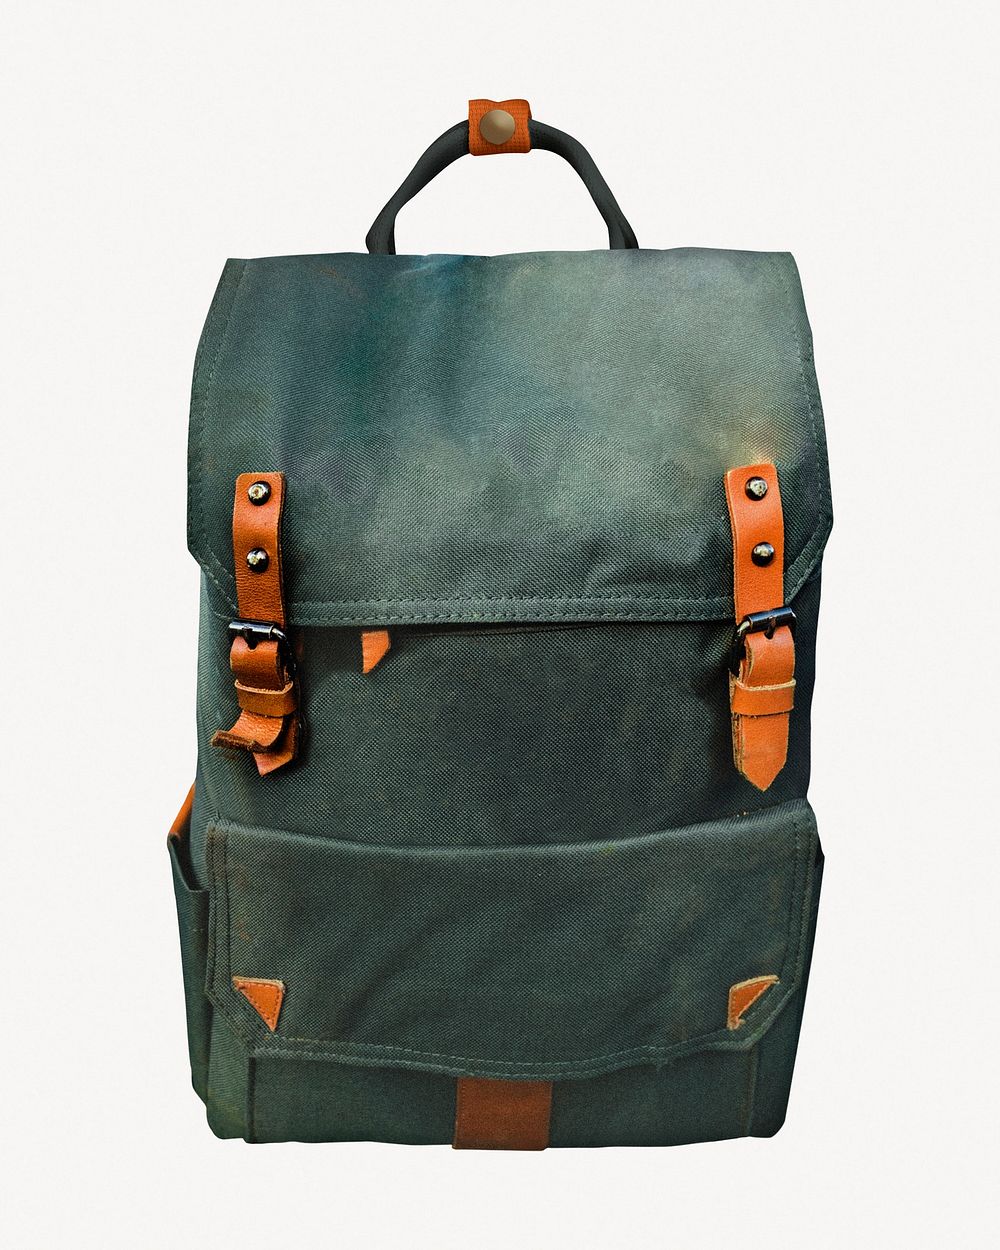 Green traveler's backpack, isolated apparel image psd